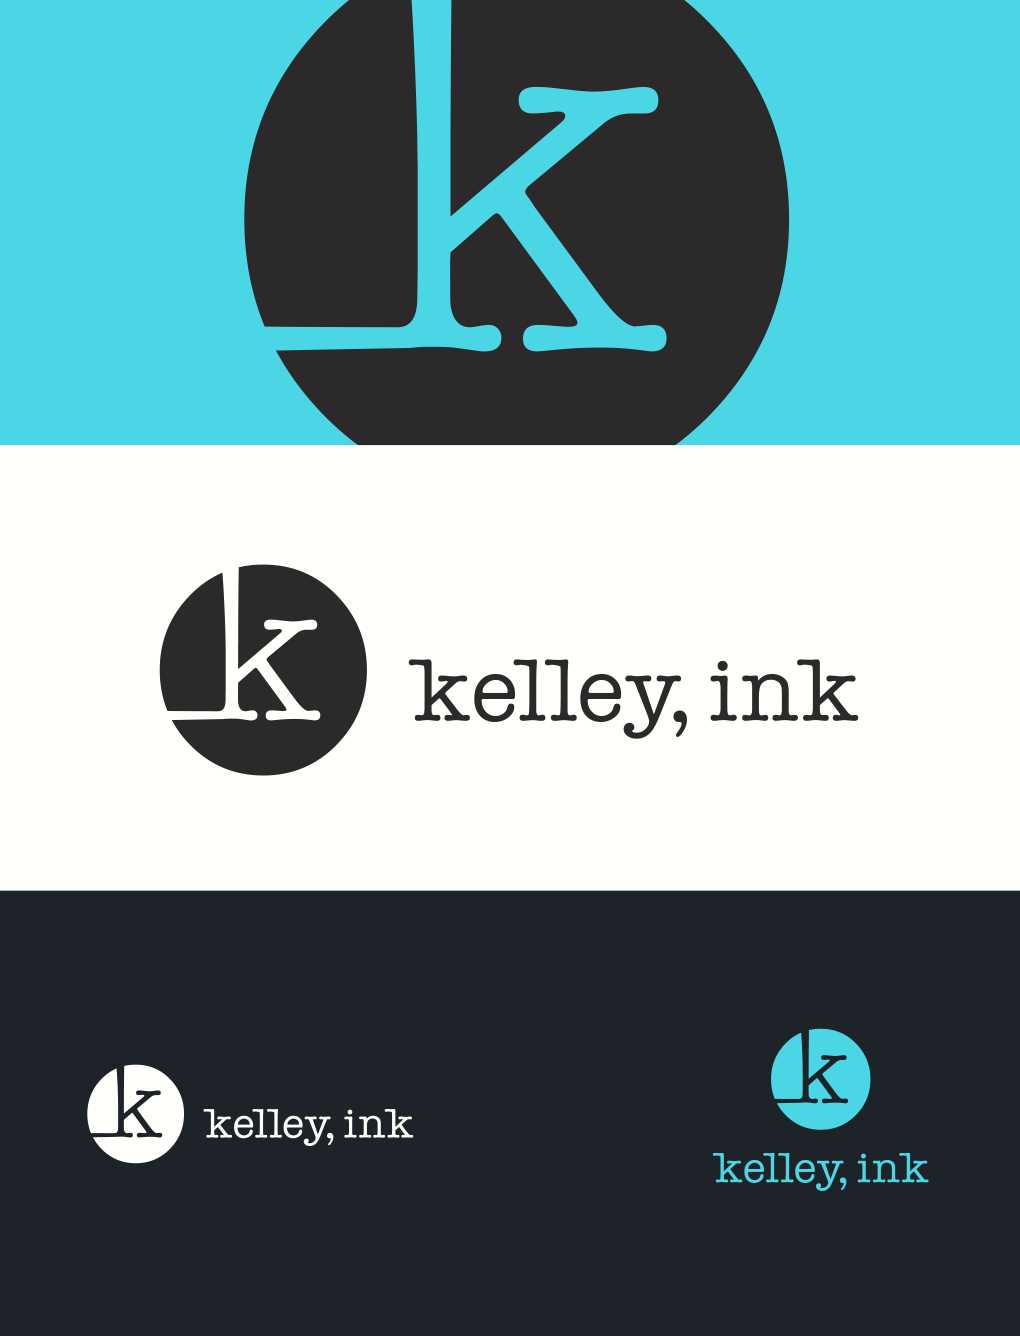 Different logos and colors for Kelley, Ink